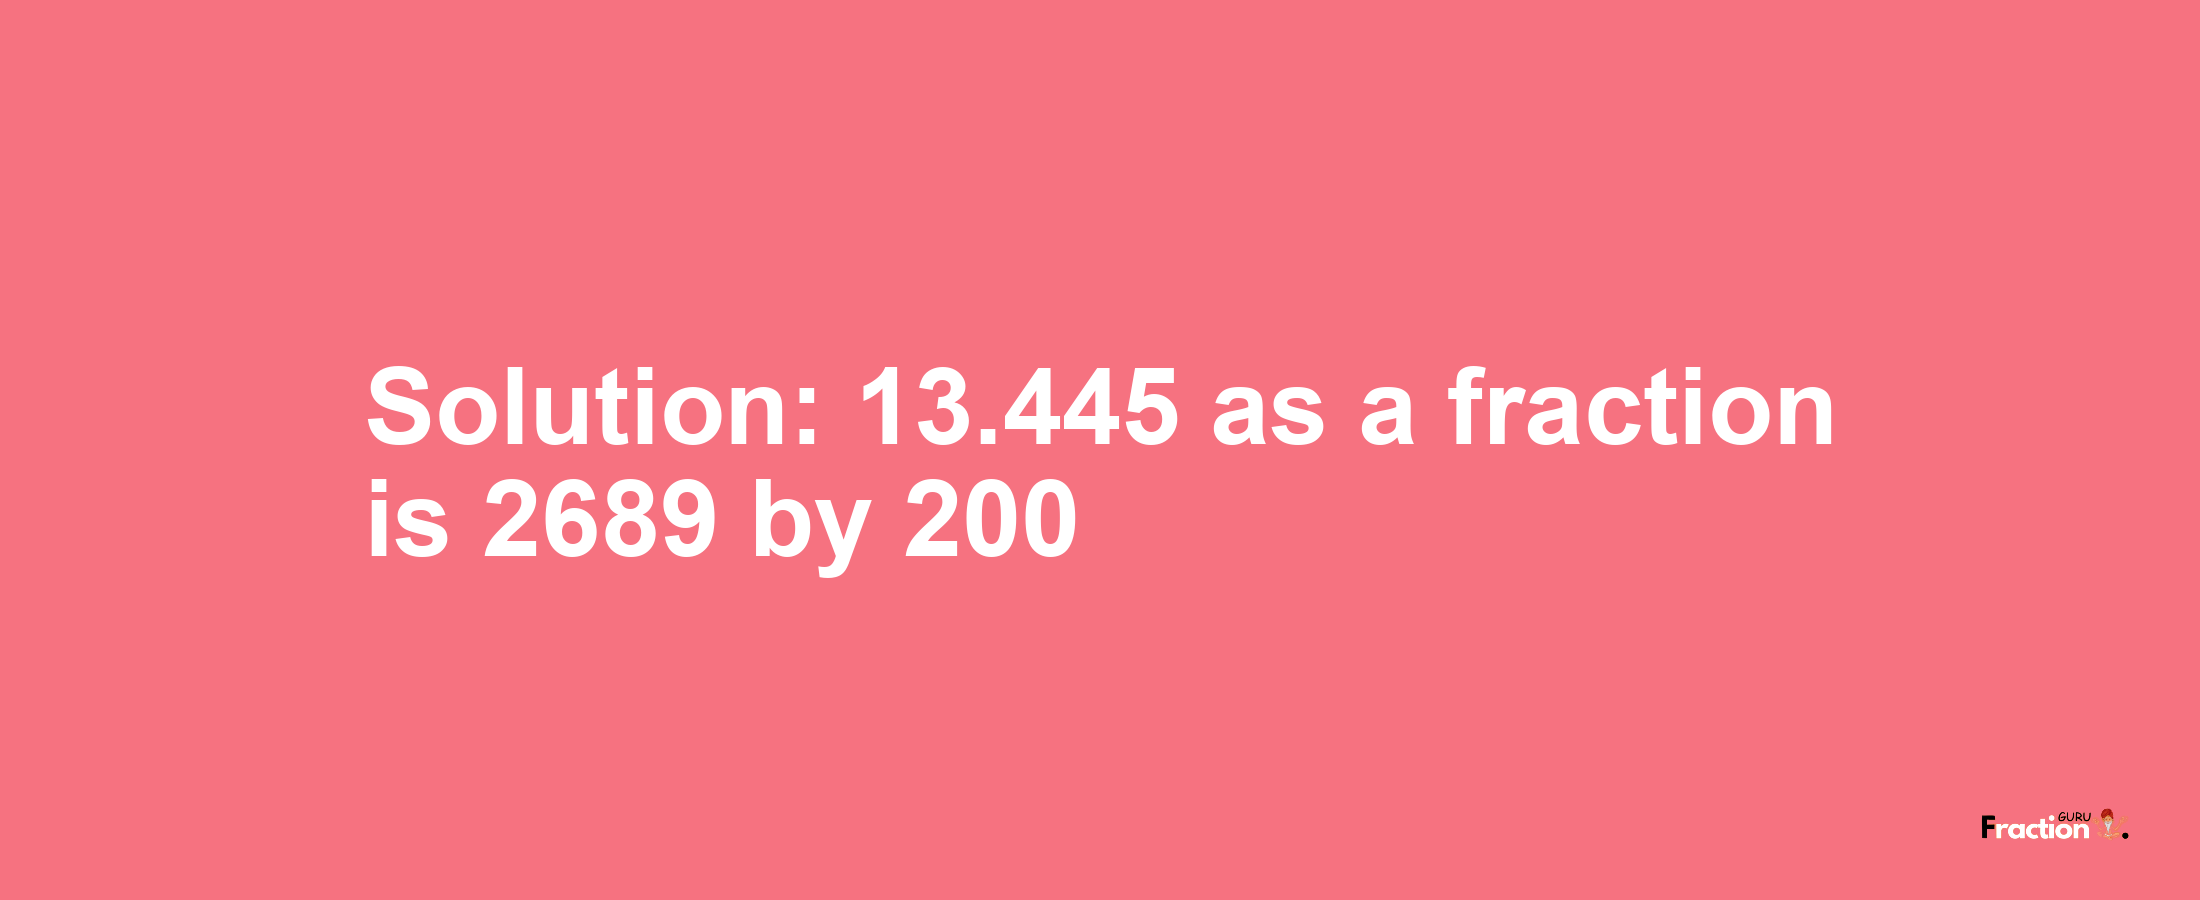 Solution:13.445 as a fraction is 2689/200